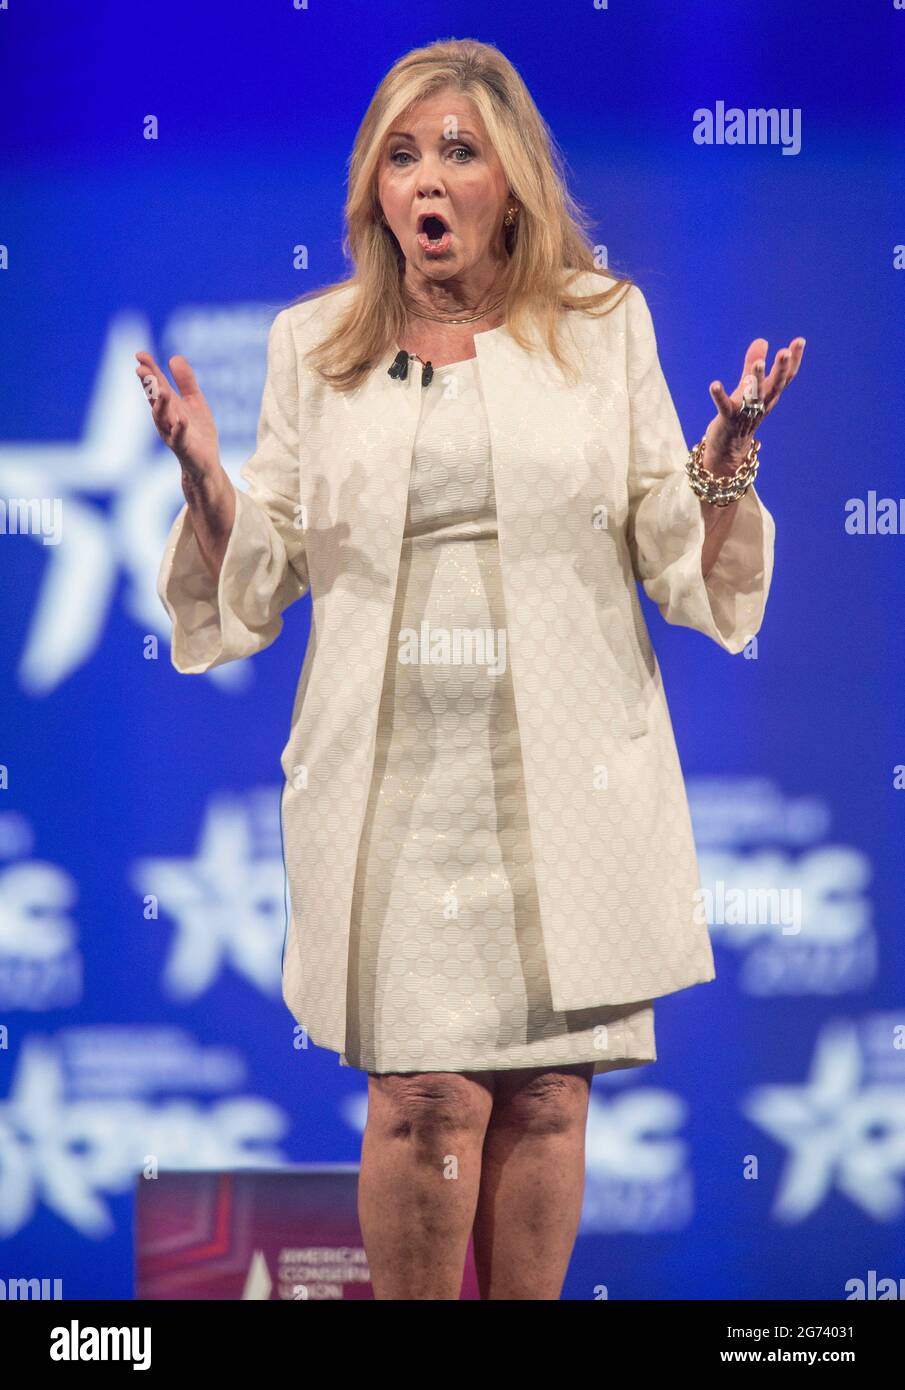 Dallas, Texas, USA. 10th July, 2021. Senator MARSHA BLACKBURN of Tennessee speaks at CPAC 2021: America UnCanceled. Organized by the American Conservative Union, the three-day conference features speakers from the right side of America's political spectrum. Credit: Brian Cahn/ZUMA Wire/Alamy Live News Stock Photo